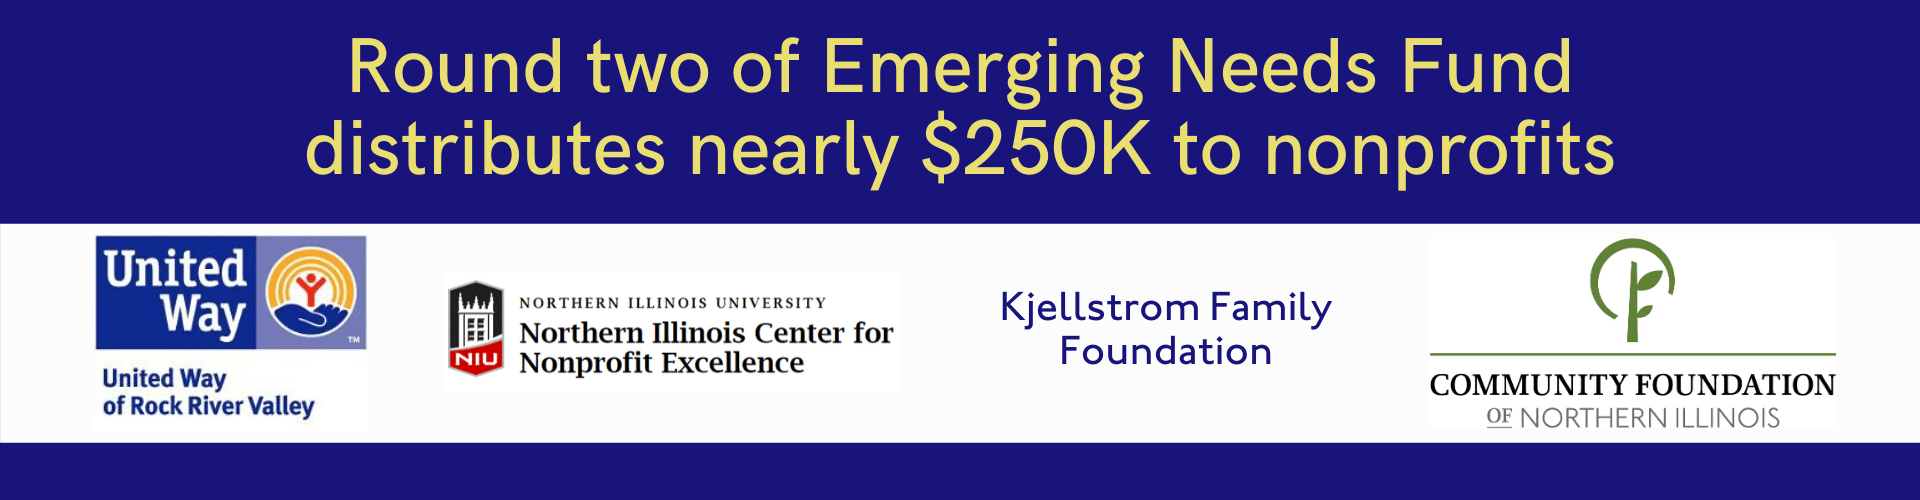 Round Two of Emerging Needs Fund distributes nearly $250,000 to 31 Nonprofits